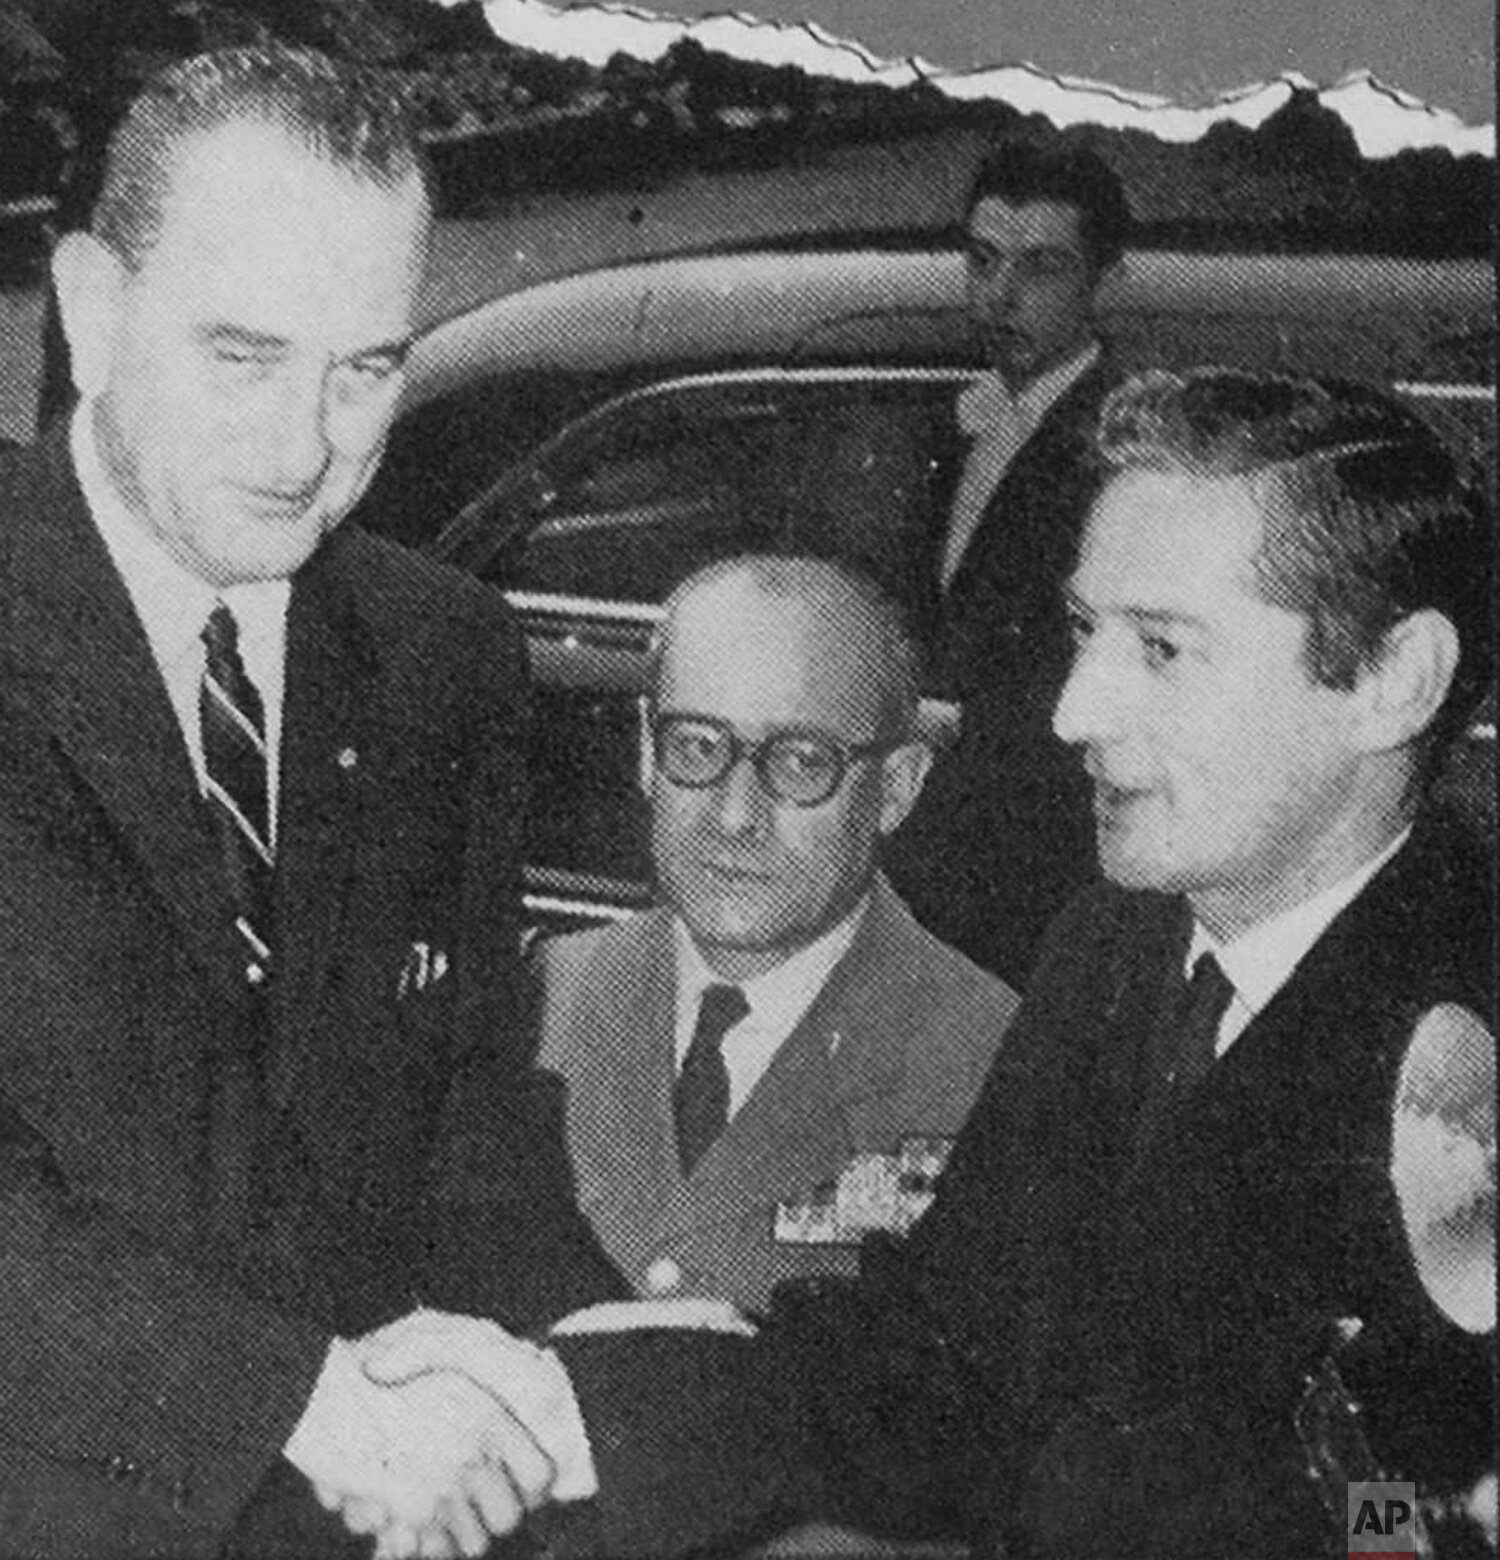  AP photographer Jean-Jacques Levy greets Vice President elect Lyndon Johnson, who was arriving to meet with Charles de Gaulle, in Paris, France. (AP Corporate Archives) 